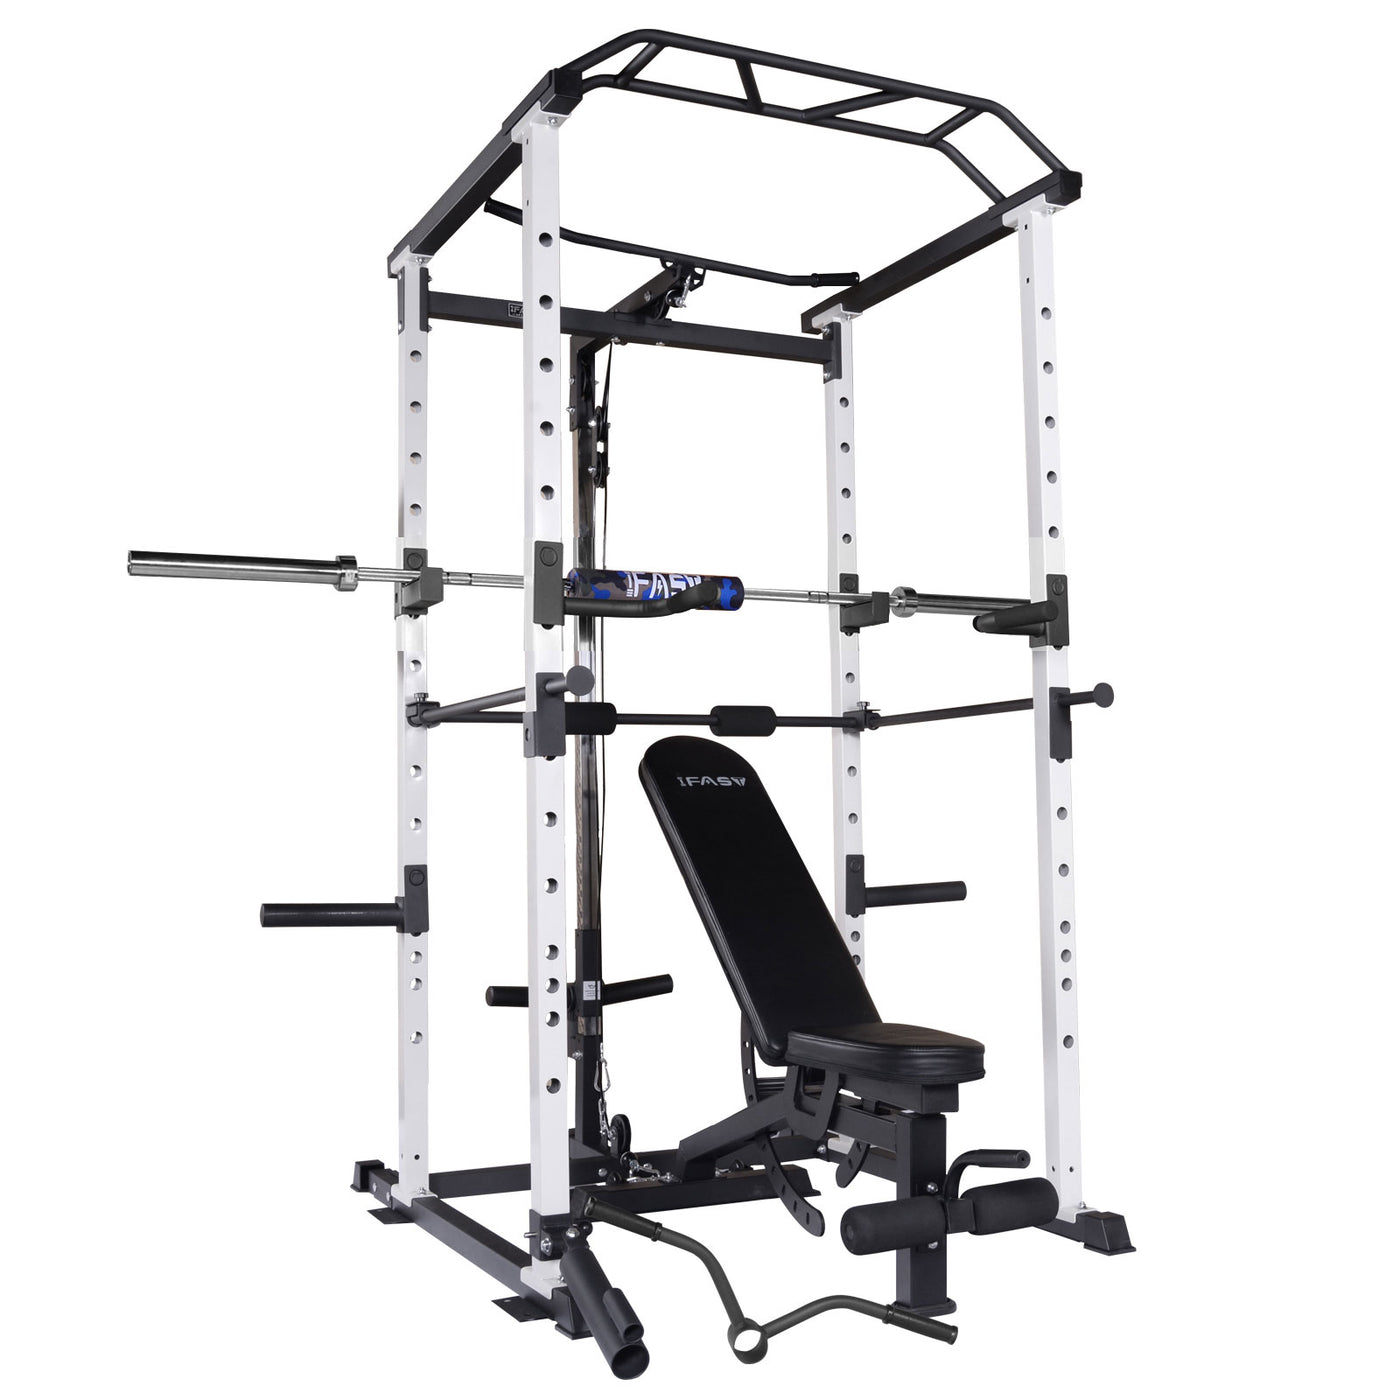 IFAST Power Rack With Bench Cable Attachment 3 Colors